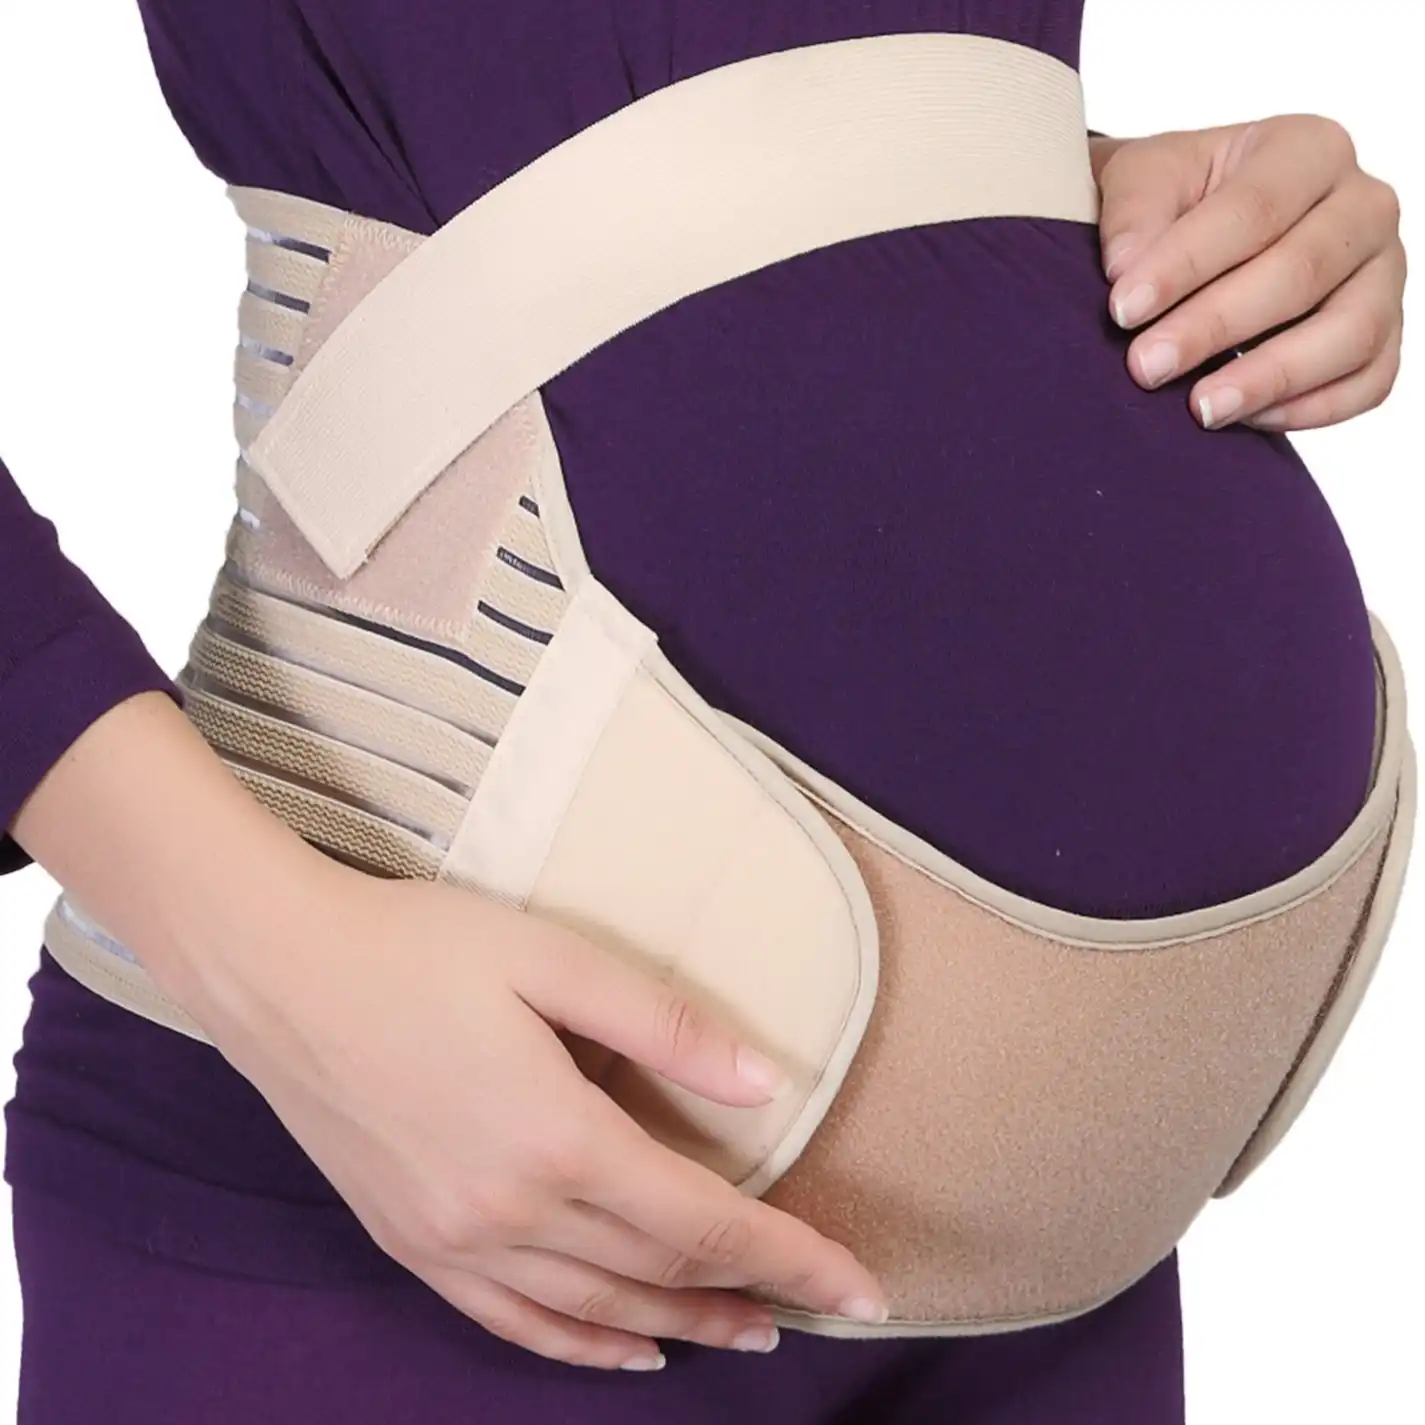 Breathable Adjustable Maternity Belt Belly Support Band for Pregnancy Pelvic Pain Relief